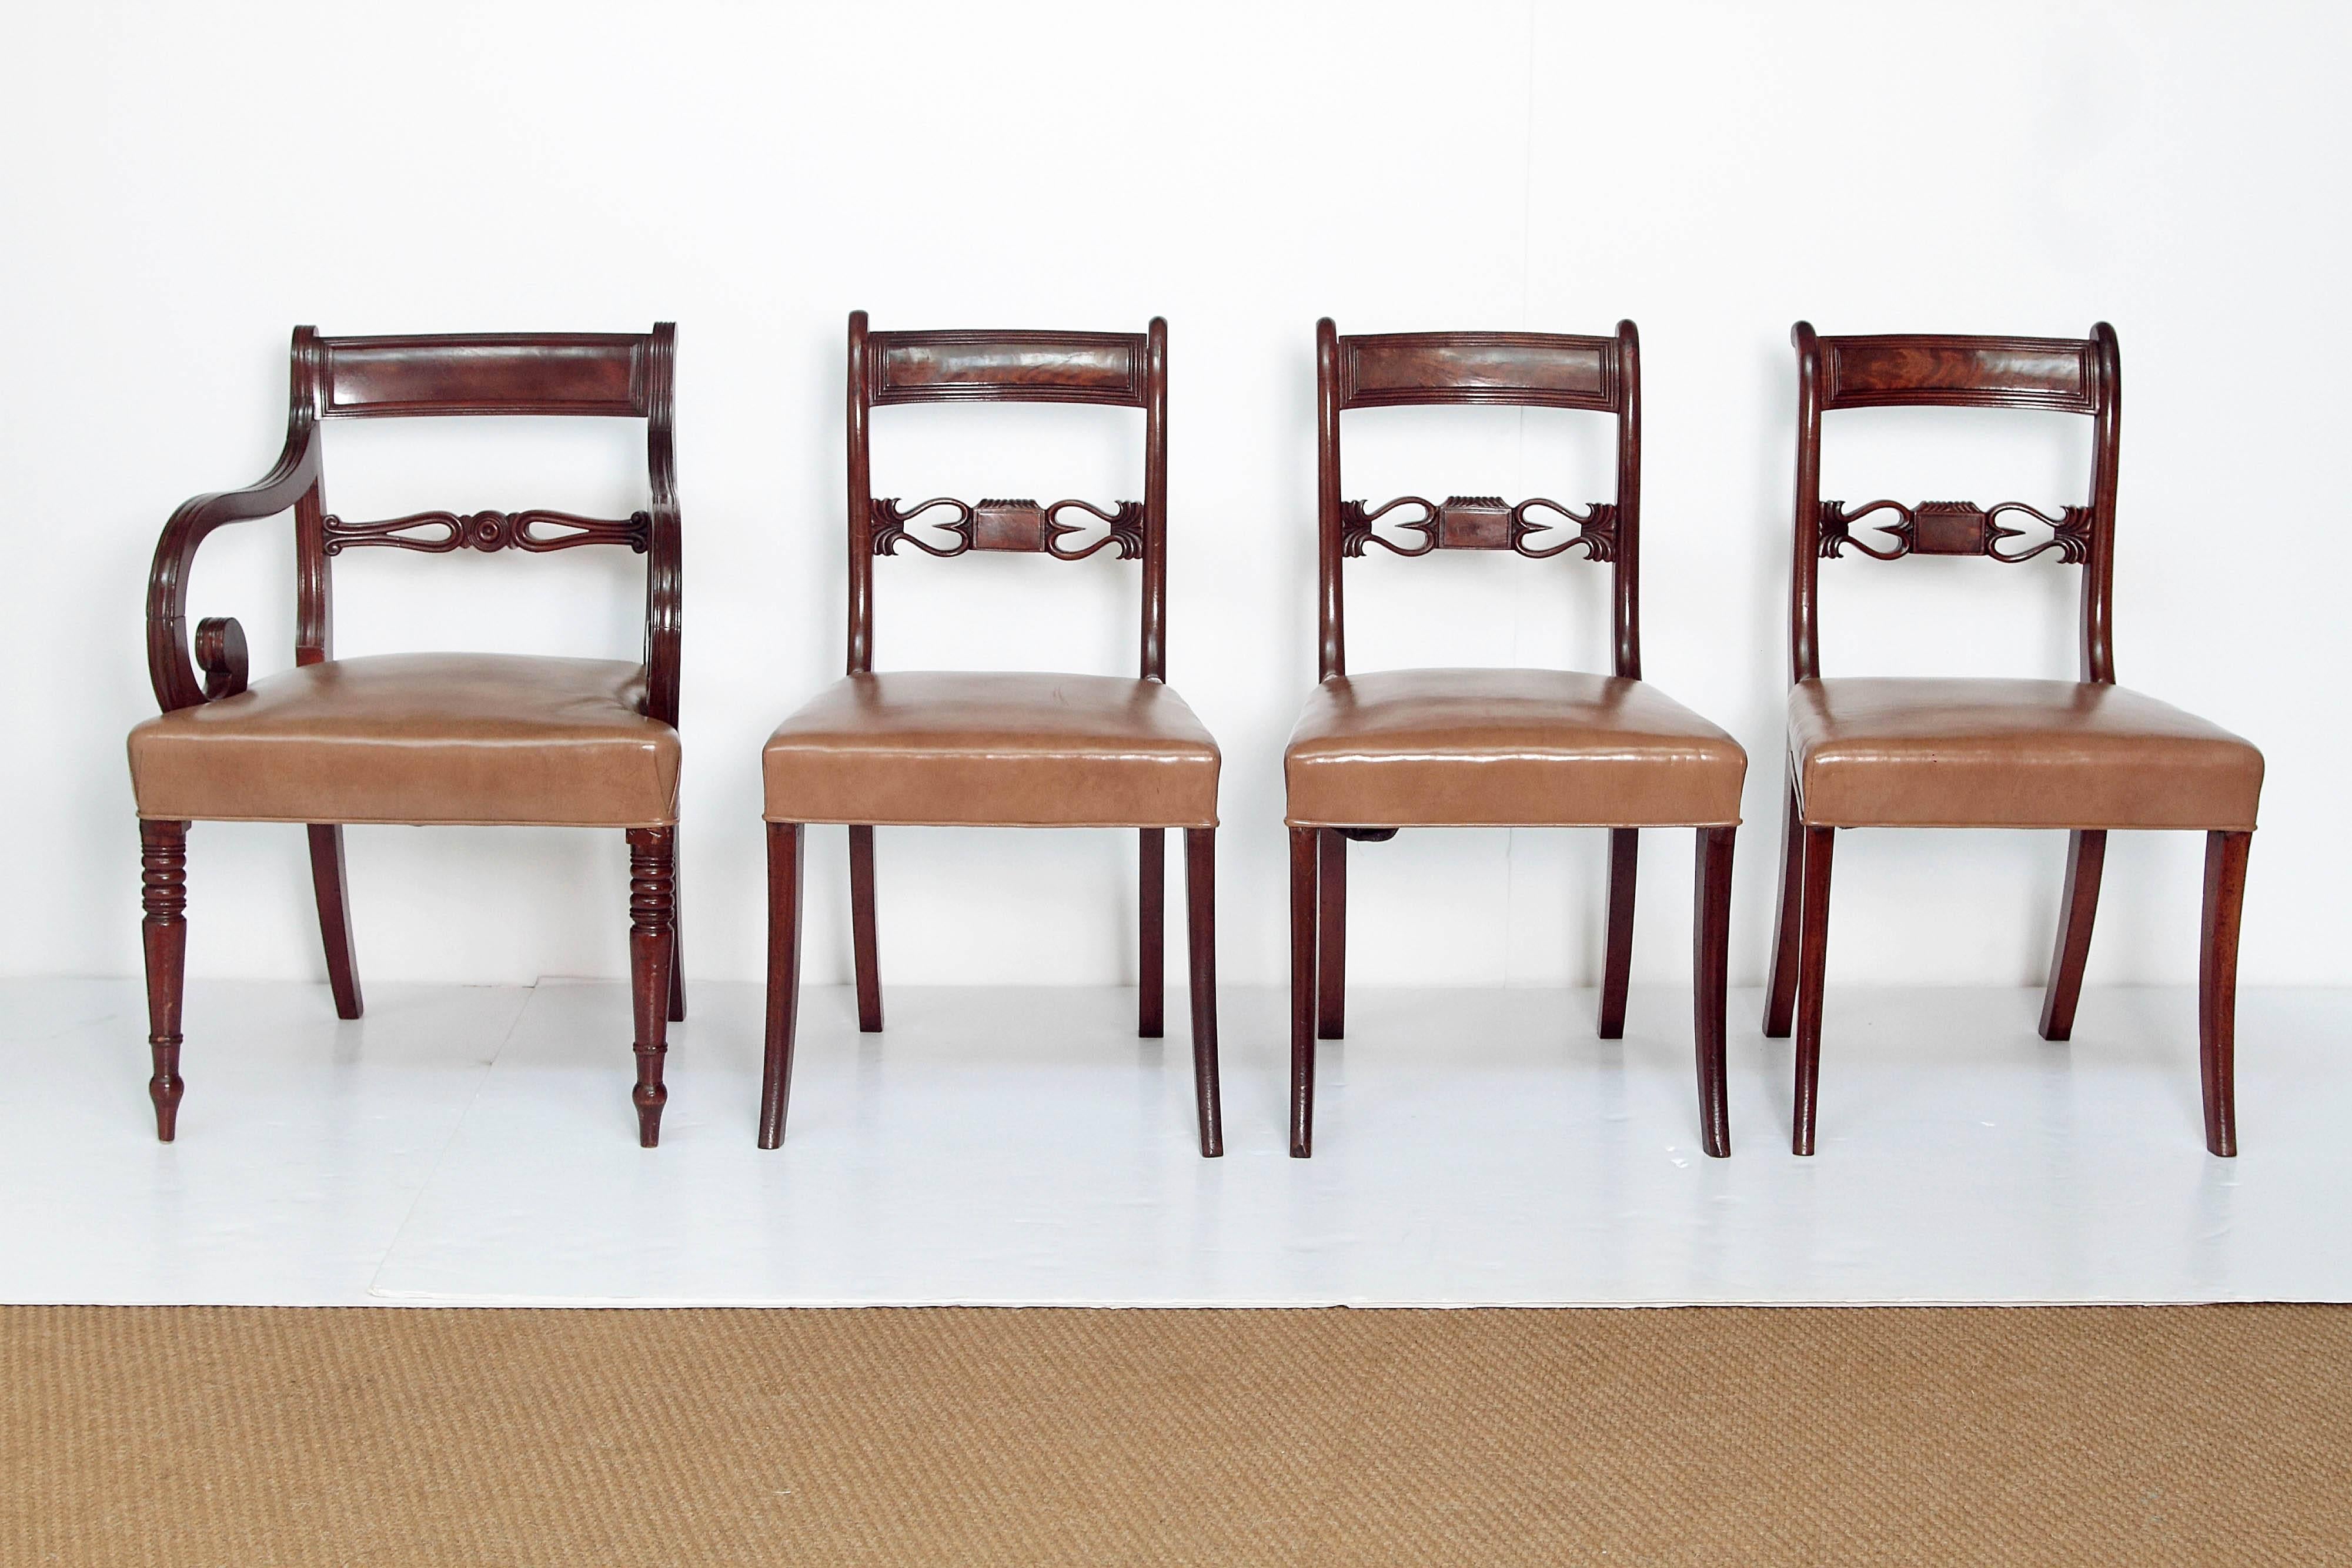 A set of eight English Regency dining chairs, six sides and two hosts. Top rails have linear rim and open carved center back support. Hosts have curled arms and turned legs. Beige leather upholstered seats.

Dimensions of Host Chairs:
32 inches